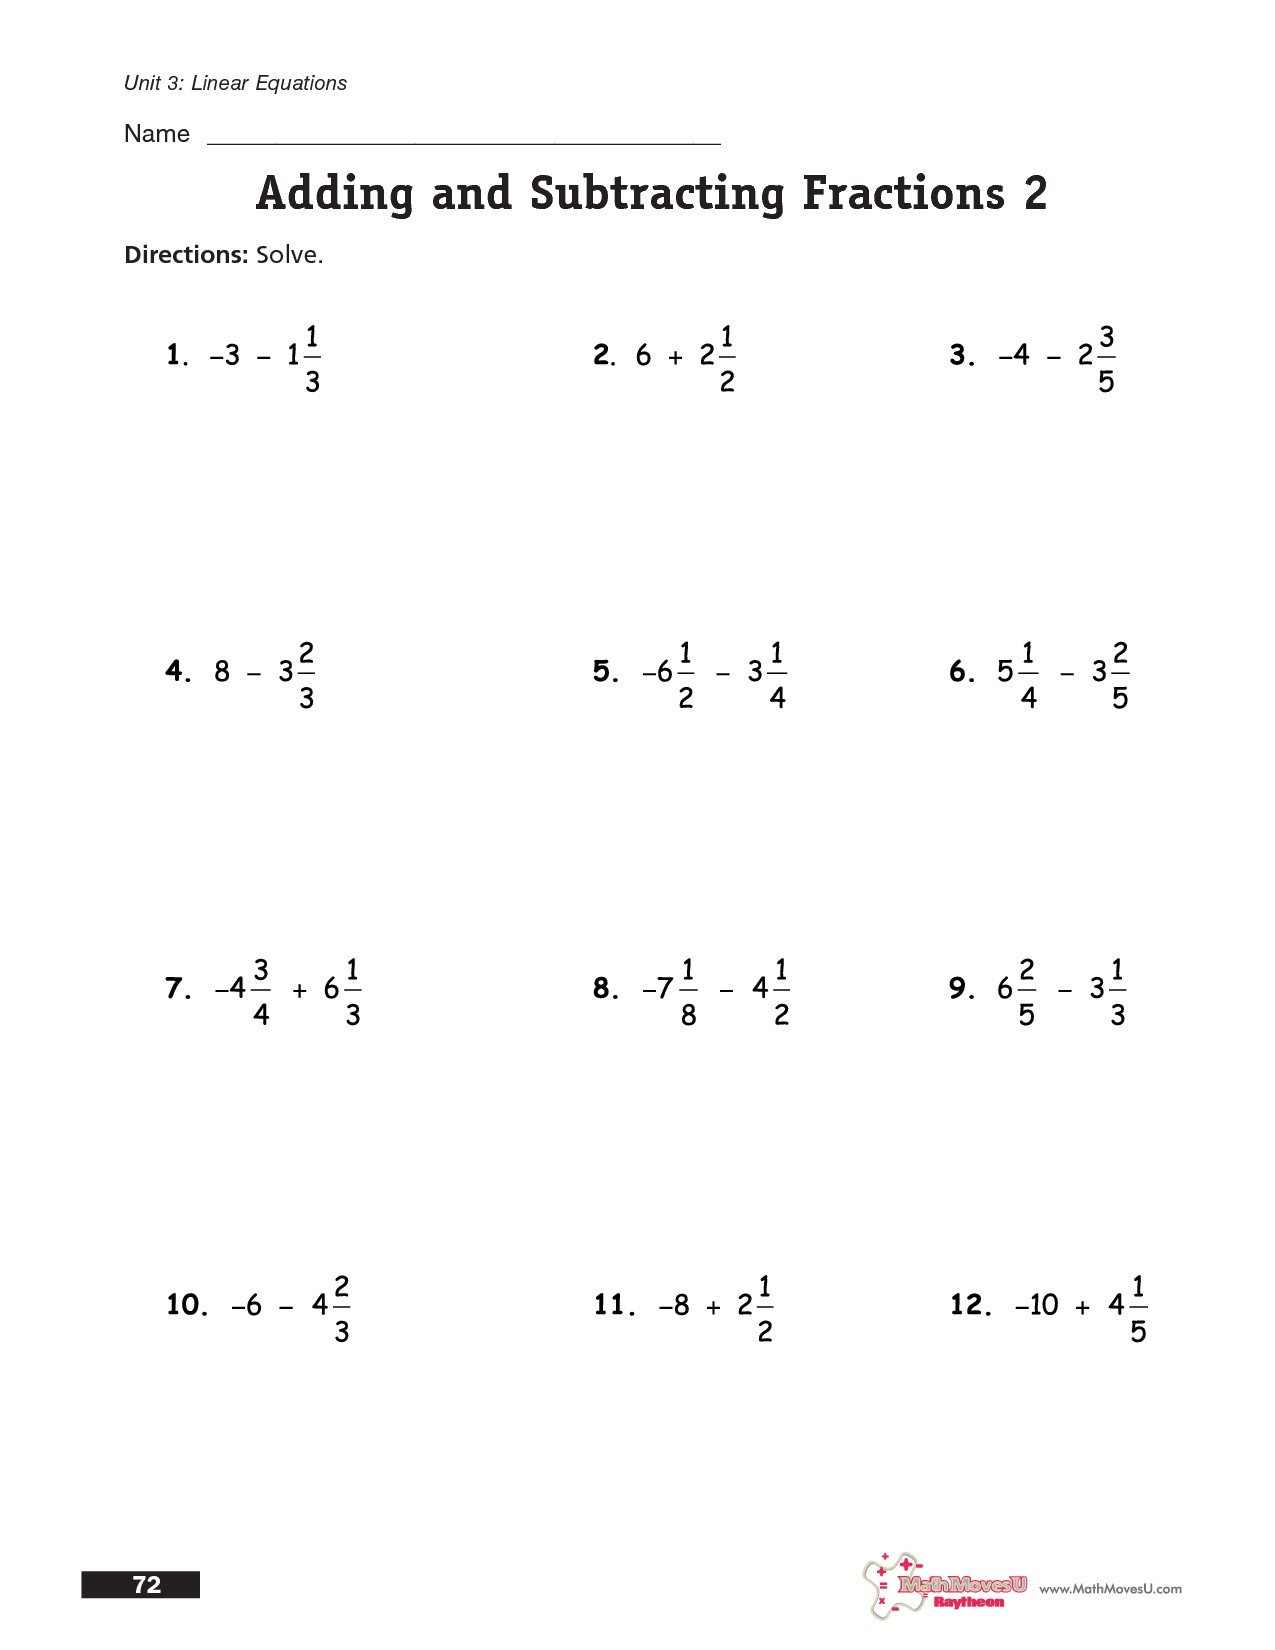 Worksheet Esl Conversation Questions For Beginners Course Anxiety Or Anxiety Worksheets For Teens